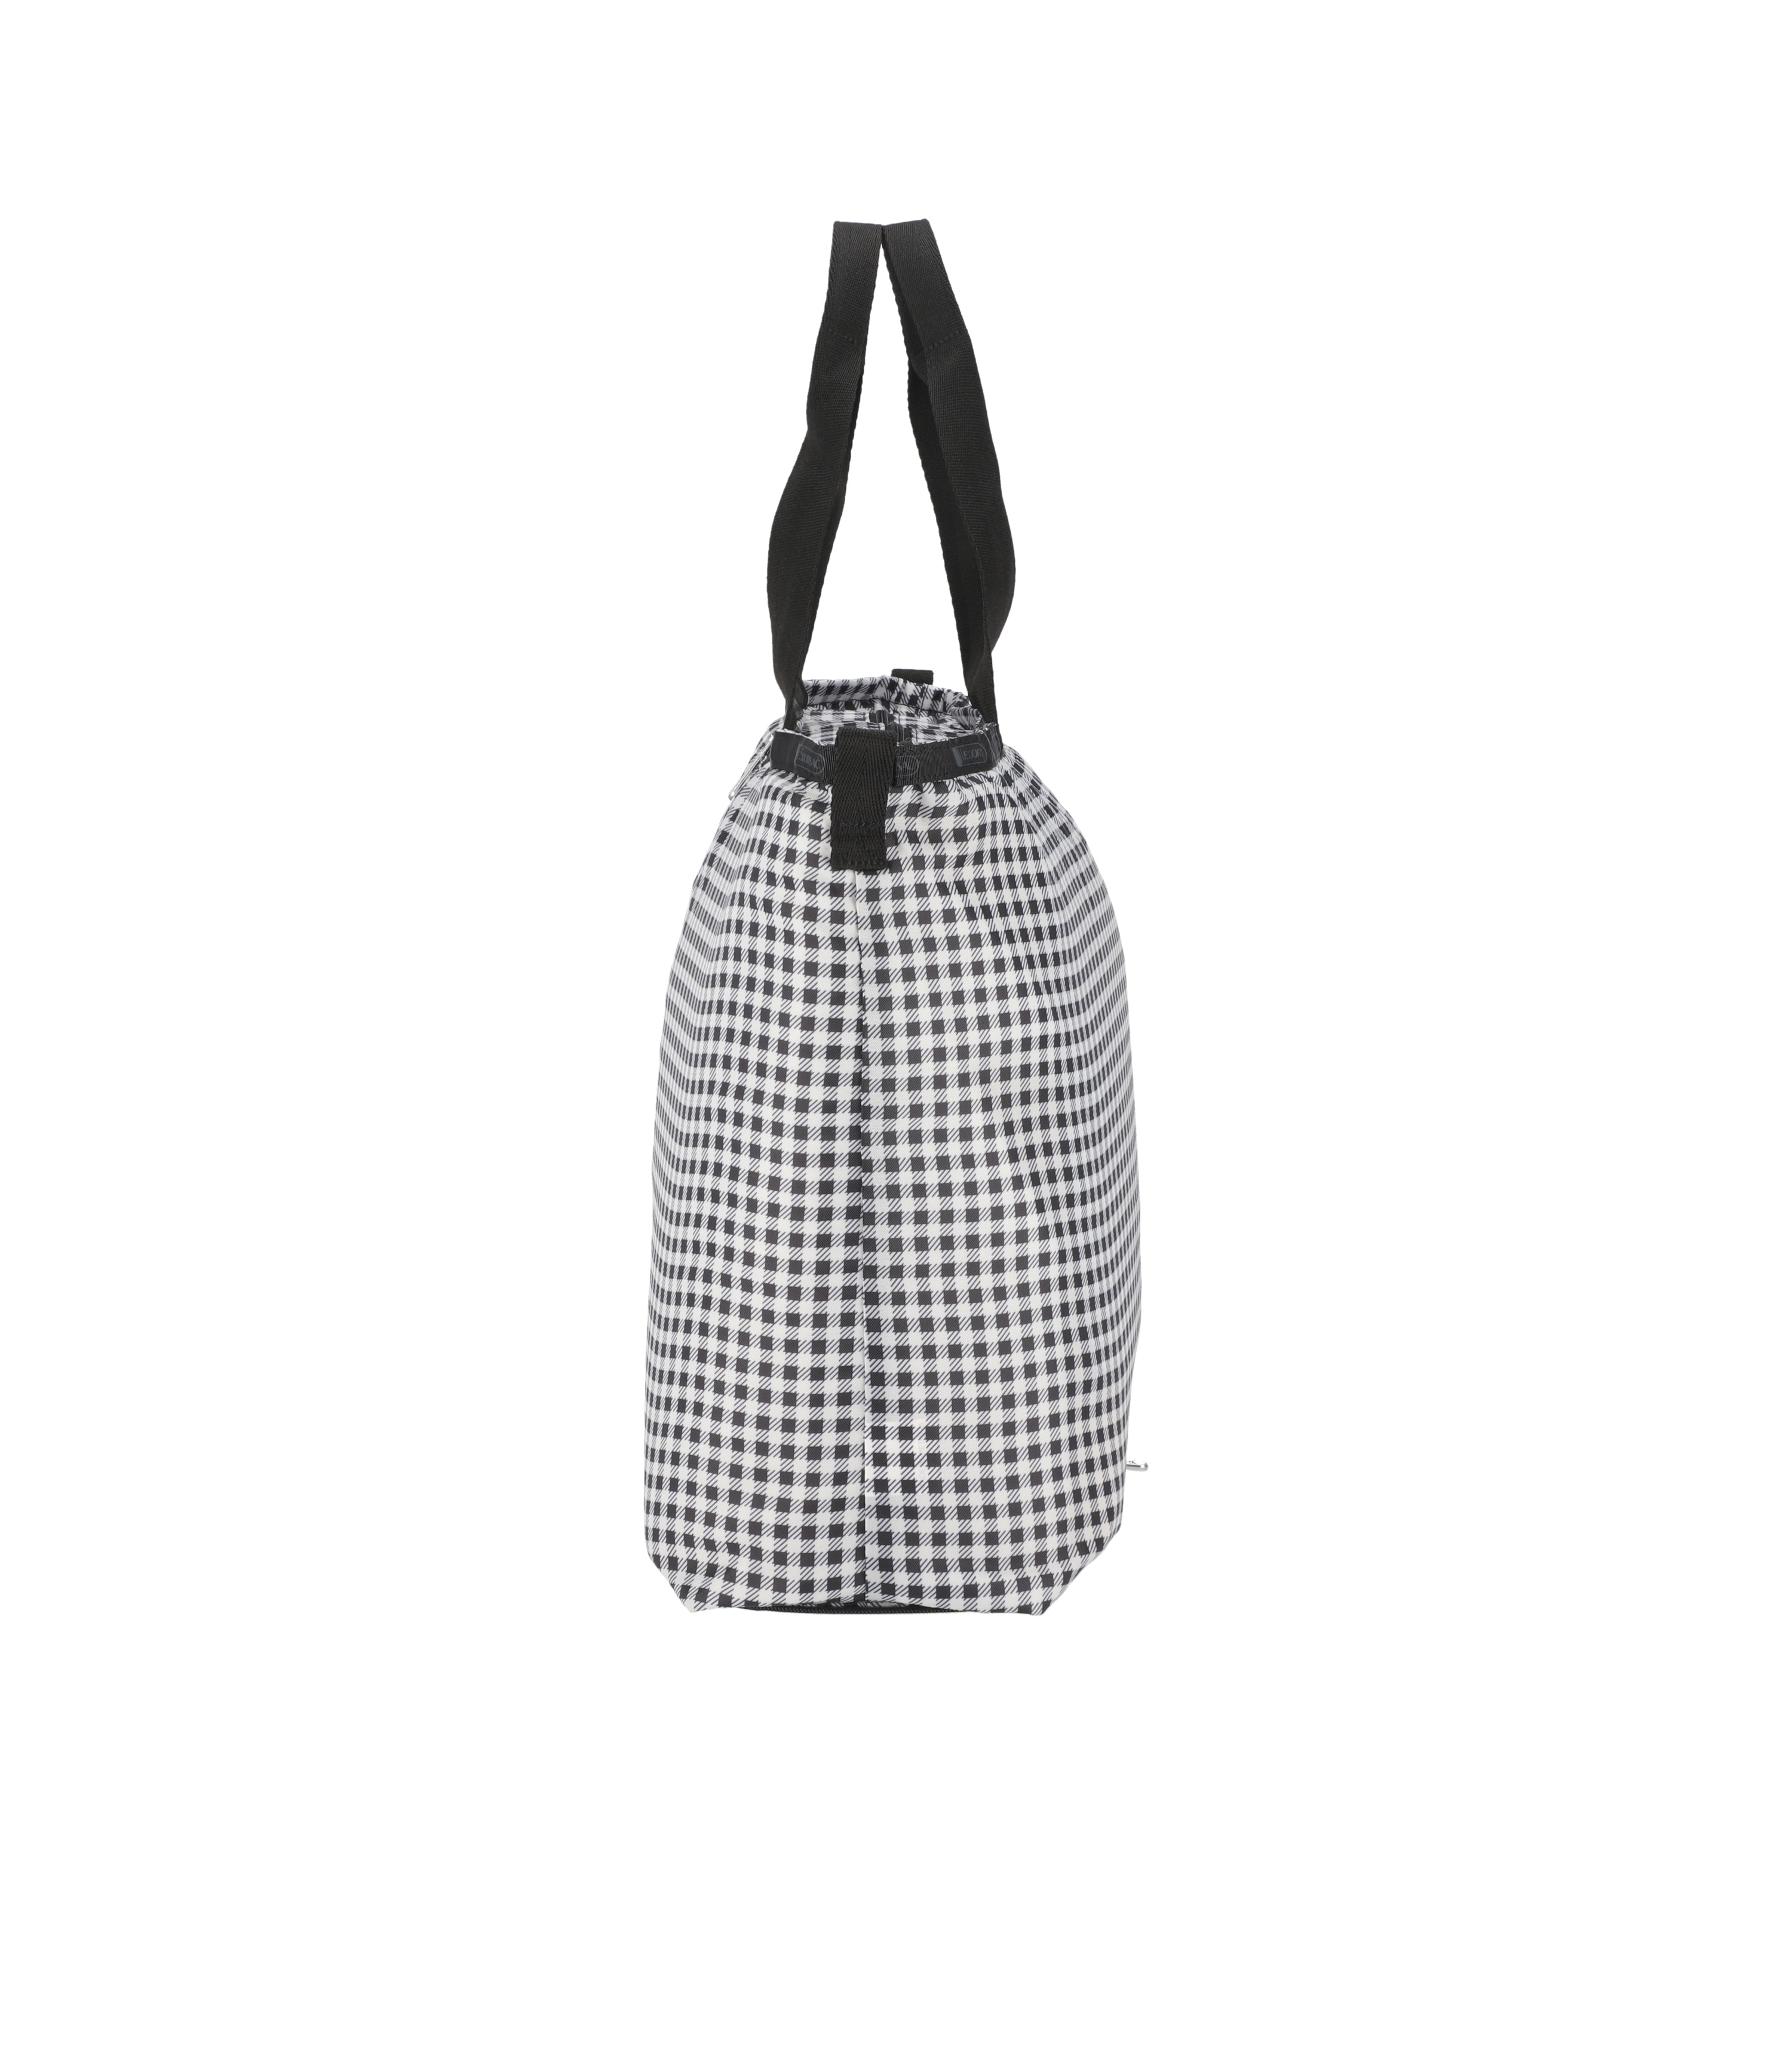 Lesportsac Packable East/West Tote - Gingham Check Noir Print